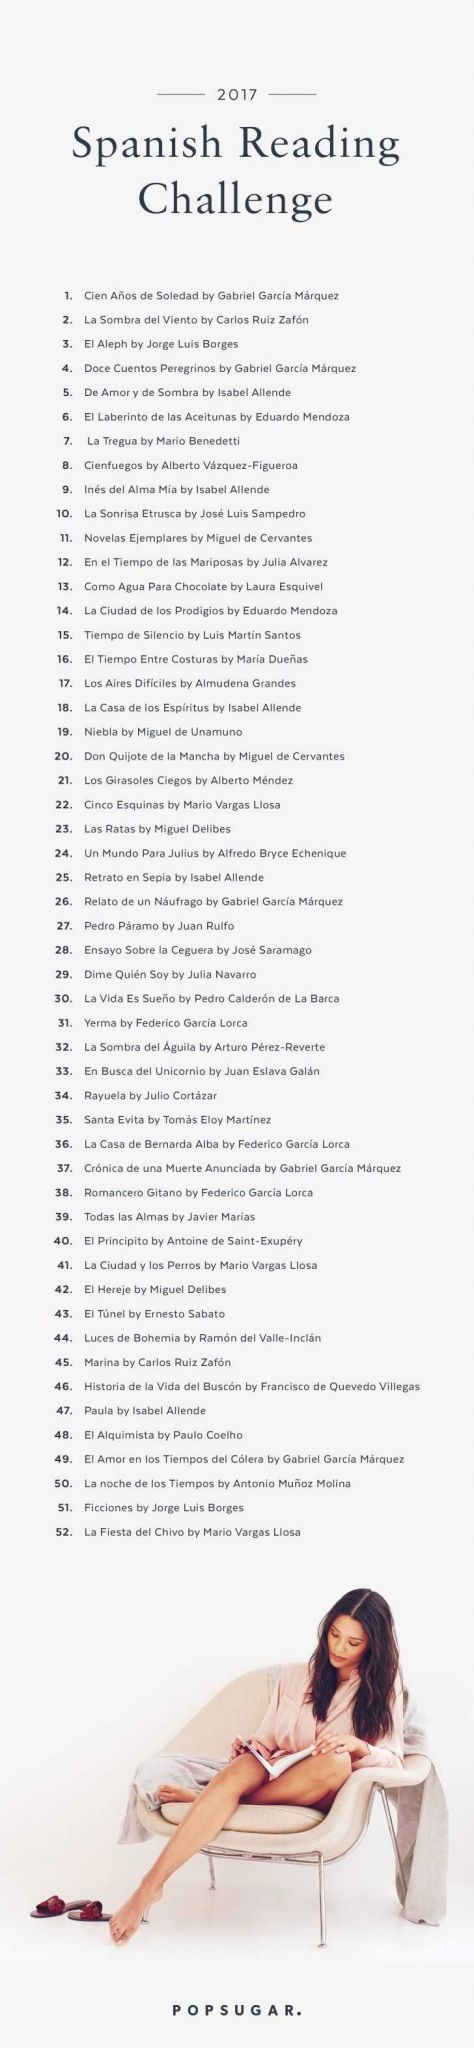 The Imperfect Tense In Spanish Worksheet Answer Key together with 2077 Best Class Resources Images On Pinterest